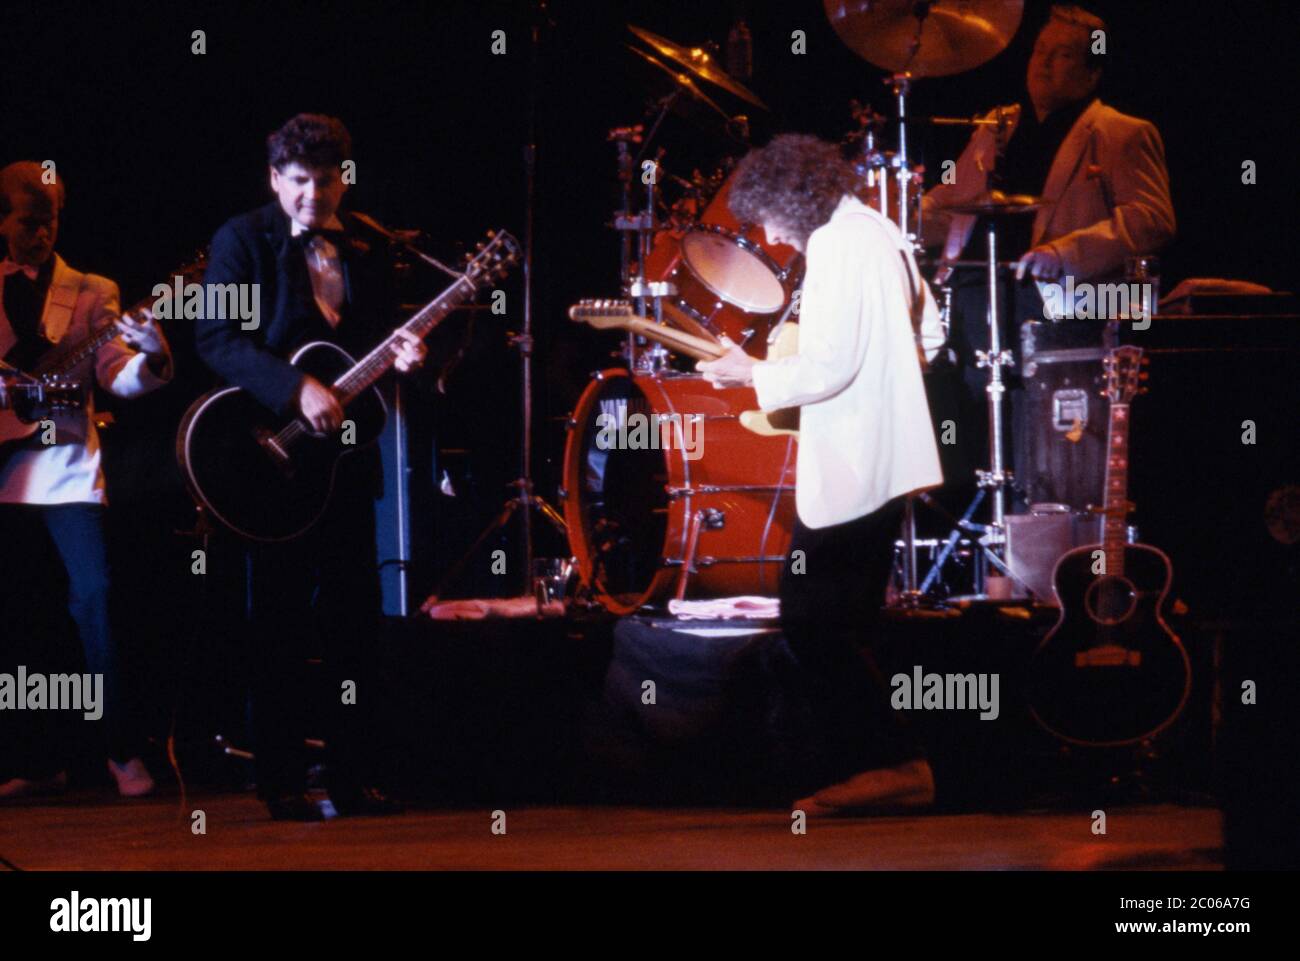 The Everly Brothers in concert at the Hammersmith Odeon in London, UK, on 14th November 1984. Stock Photo